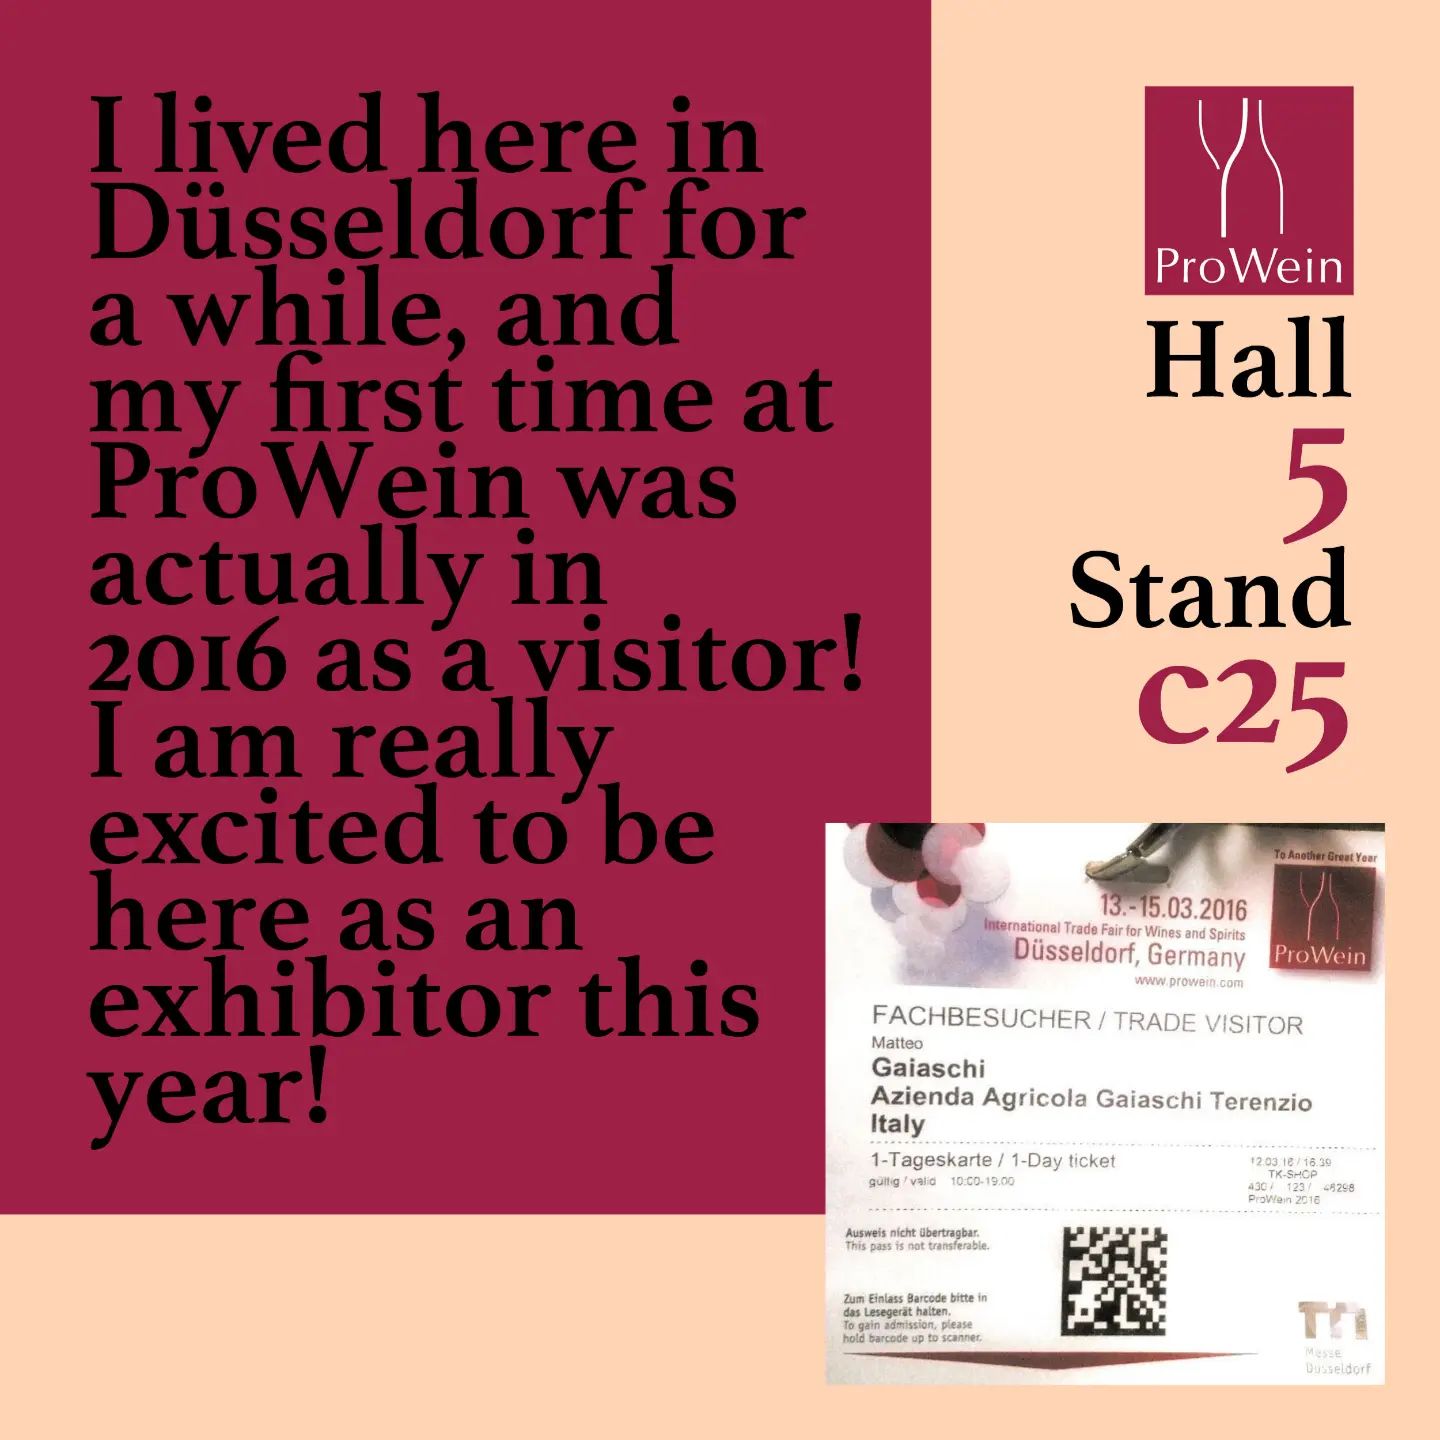 ProWein 22 is coming up!

Why should you come visit us?

➡️ First time at ProWein, but we have been around for more than 150 years
➡️ We'll be the only winery there from Colli Piacentini
➡️ Discover new wines your competitors don't have
➡️ Set a trend with Colli Piacentini wines

Just write me in direct if you wanna meet up at Hall 5 - Stand C25!

#iobevogaiaschi
#prowein
#cheersprowein
#endlichwiedermesse
#finallytradefair
#düsseldorf
#wein #wine #winelover #winetasting #instawine #winetime #vinopiacentino #zianopiacentino #valtidone #passionwine #winepassion #vinoitaliano #italianwine #collipiacentini